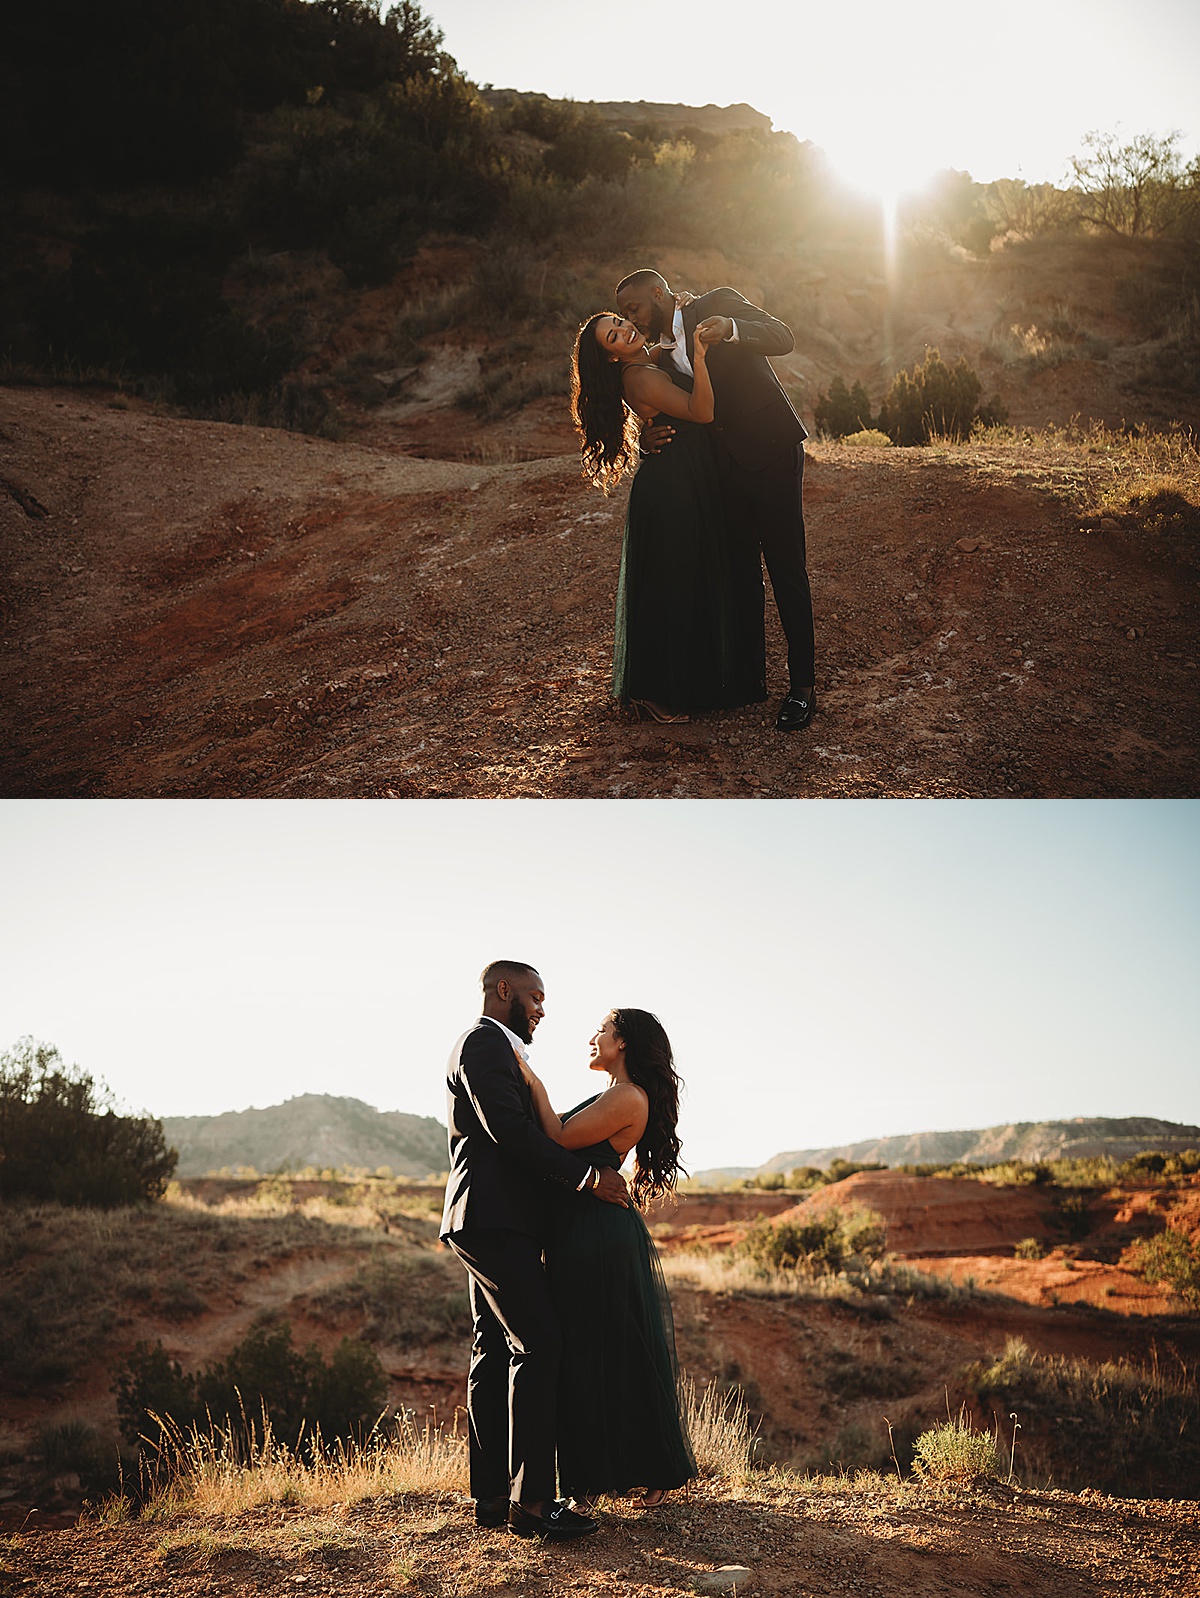 man and woman in green gown dance in red dirt canyon during glamorous nature engagement shoot